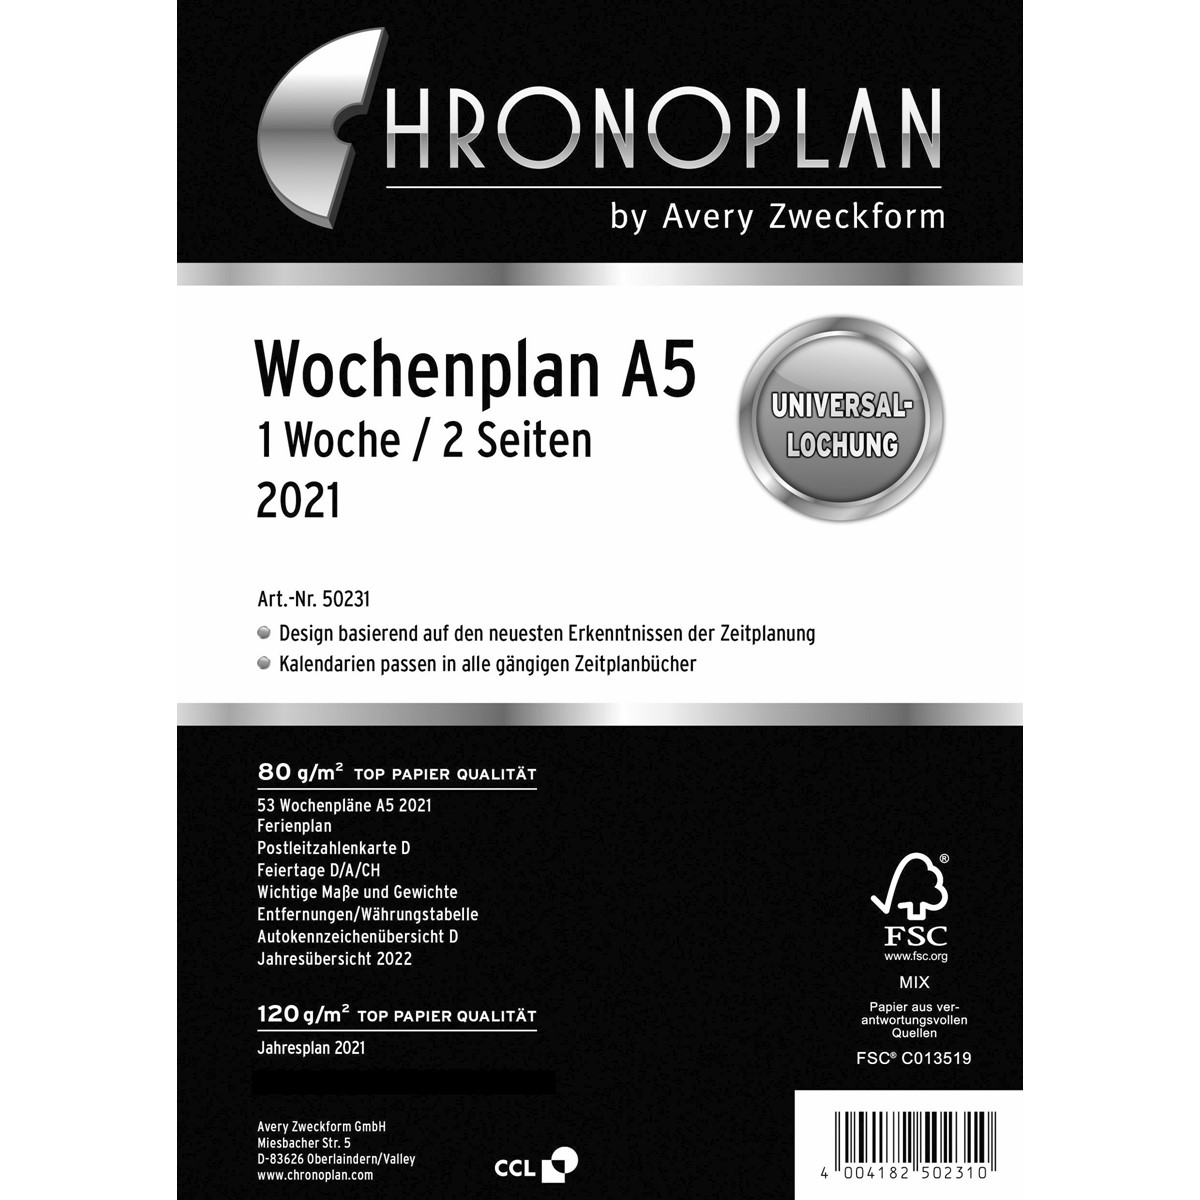 Avery Zweckform Chronoplan Week Planner A5 2020 (In German) RRP 5.99 CLEARANCE XL 19p